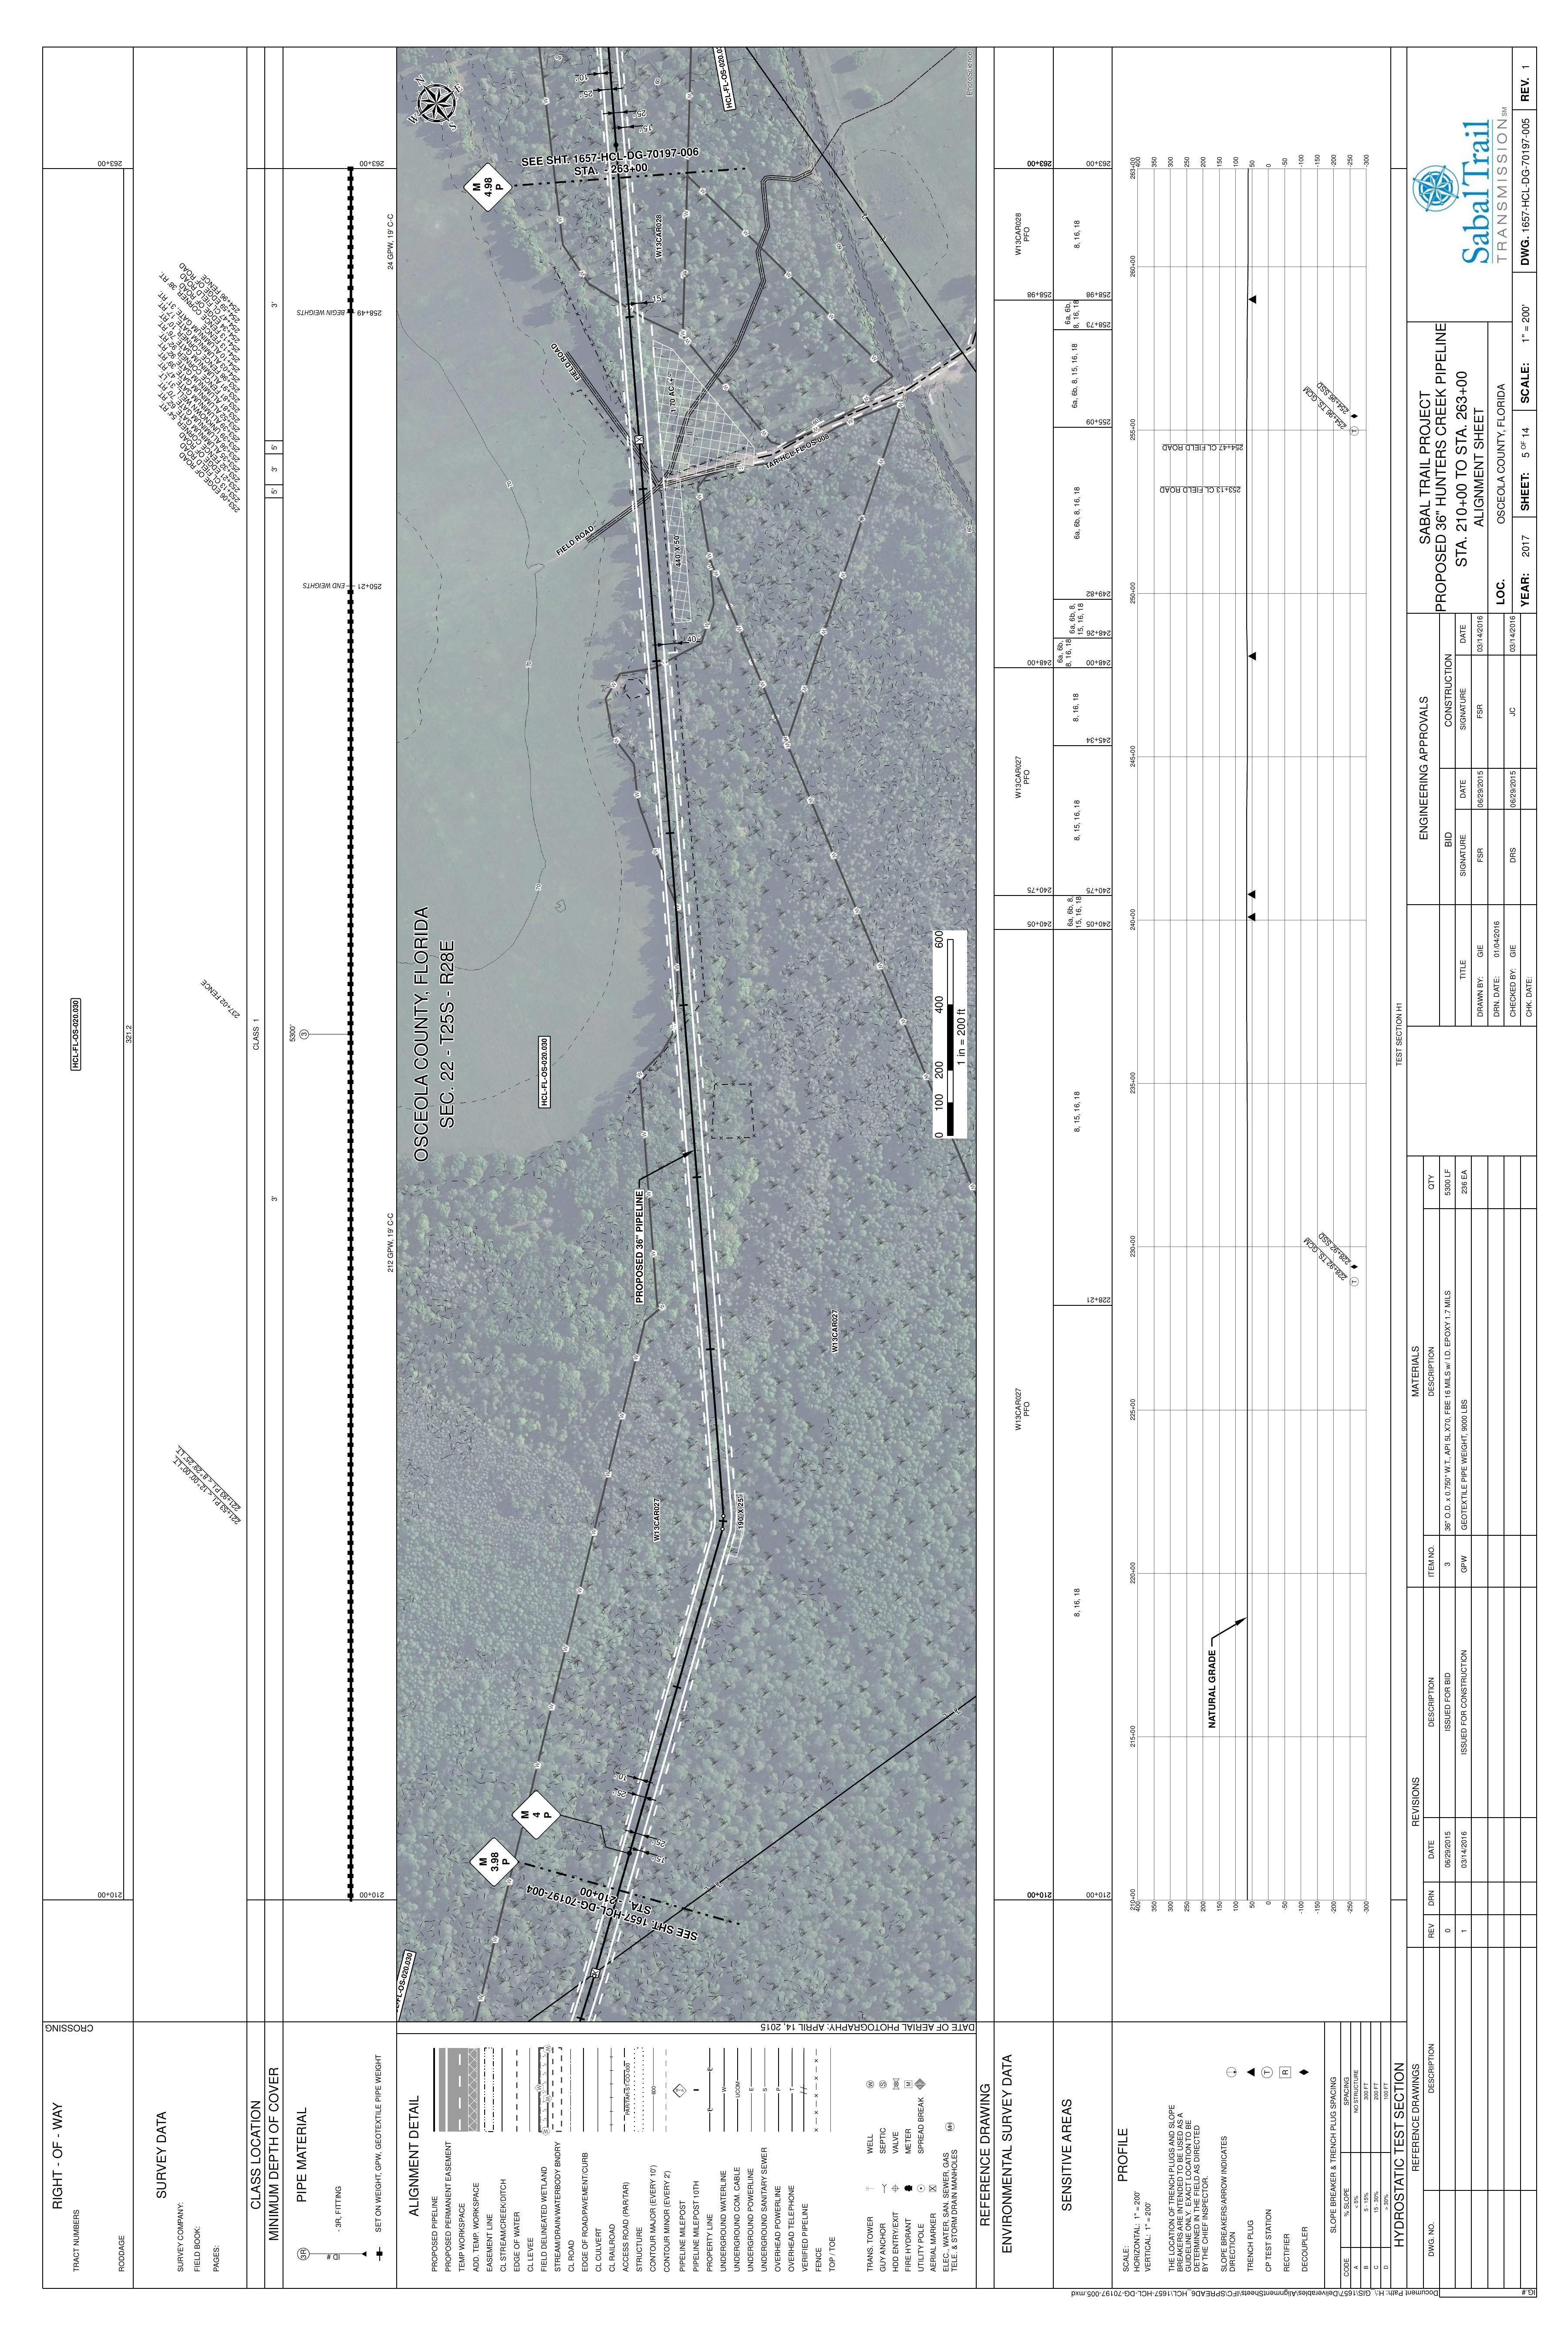 1657-HCL-DG-70197-005, STA. 210+00 TO STA. 263+00, MP 3.98, MP 4.98, Pine Island, PROPOSED 36-inch HUNTERS CREEK PIPELINE, OSCEOLA COUNTY, FLORIDA, 28.291598, -81.499680